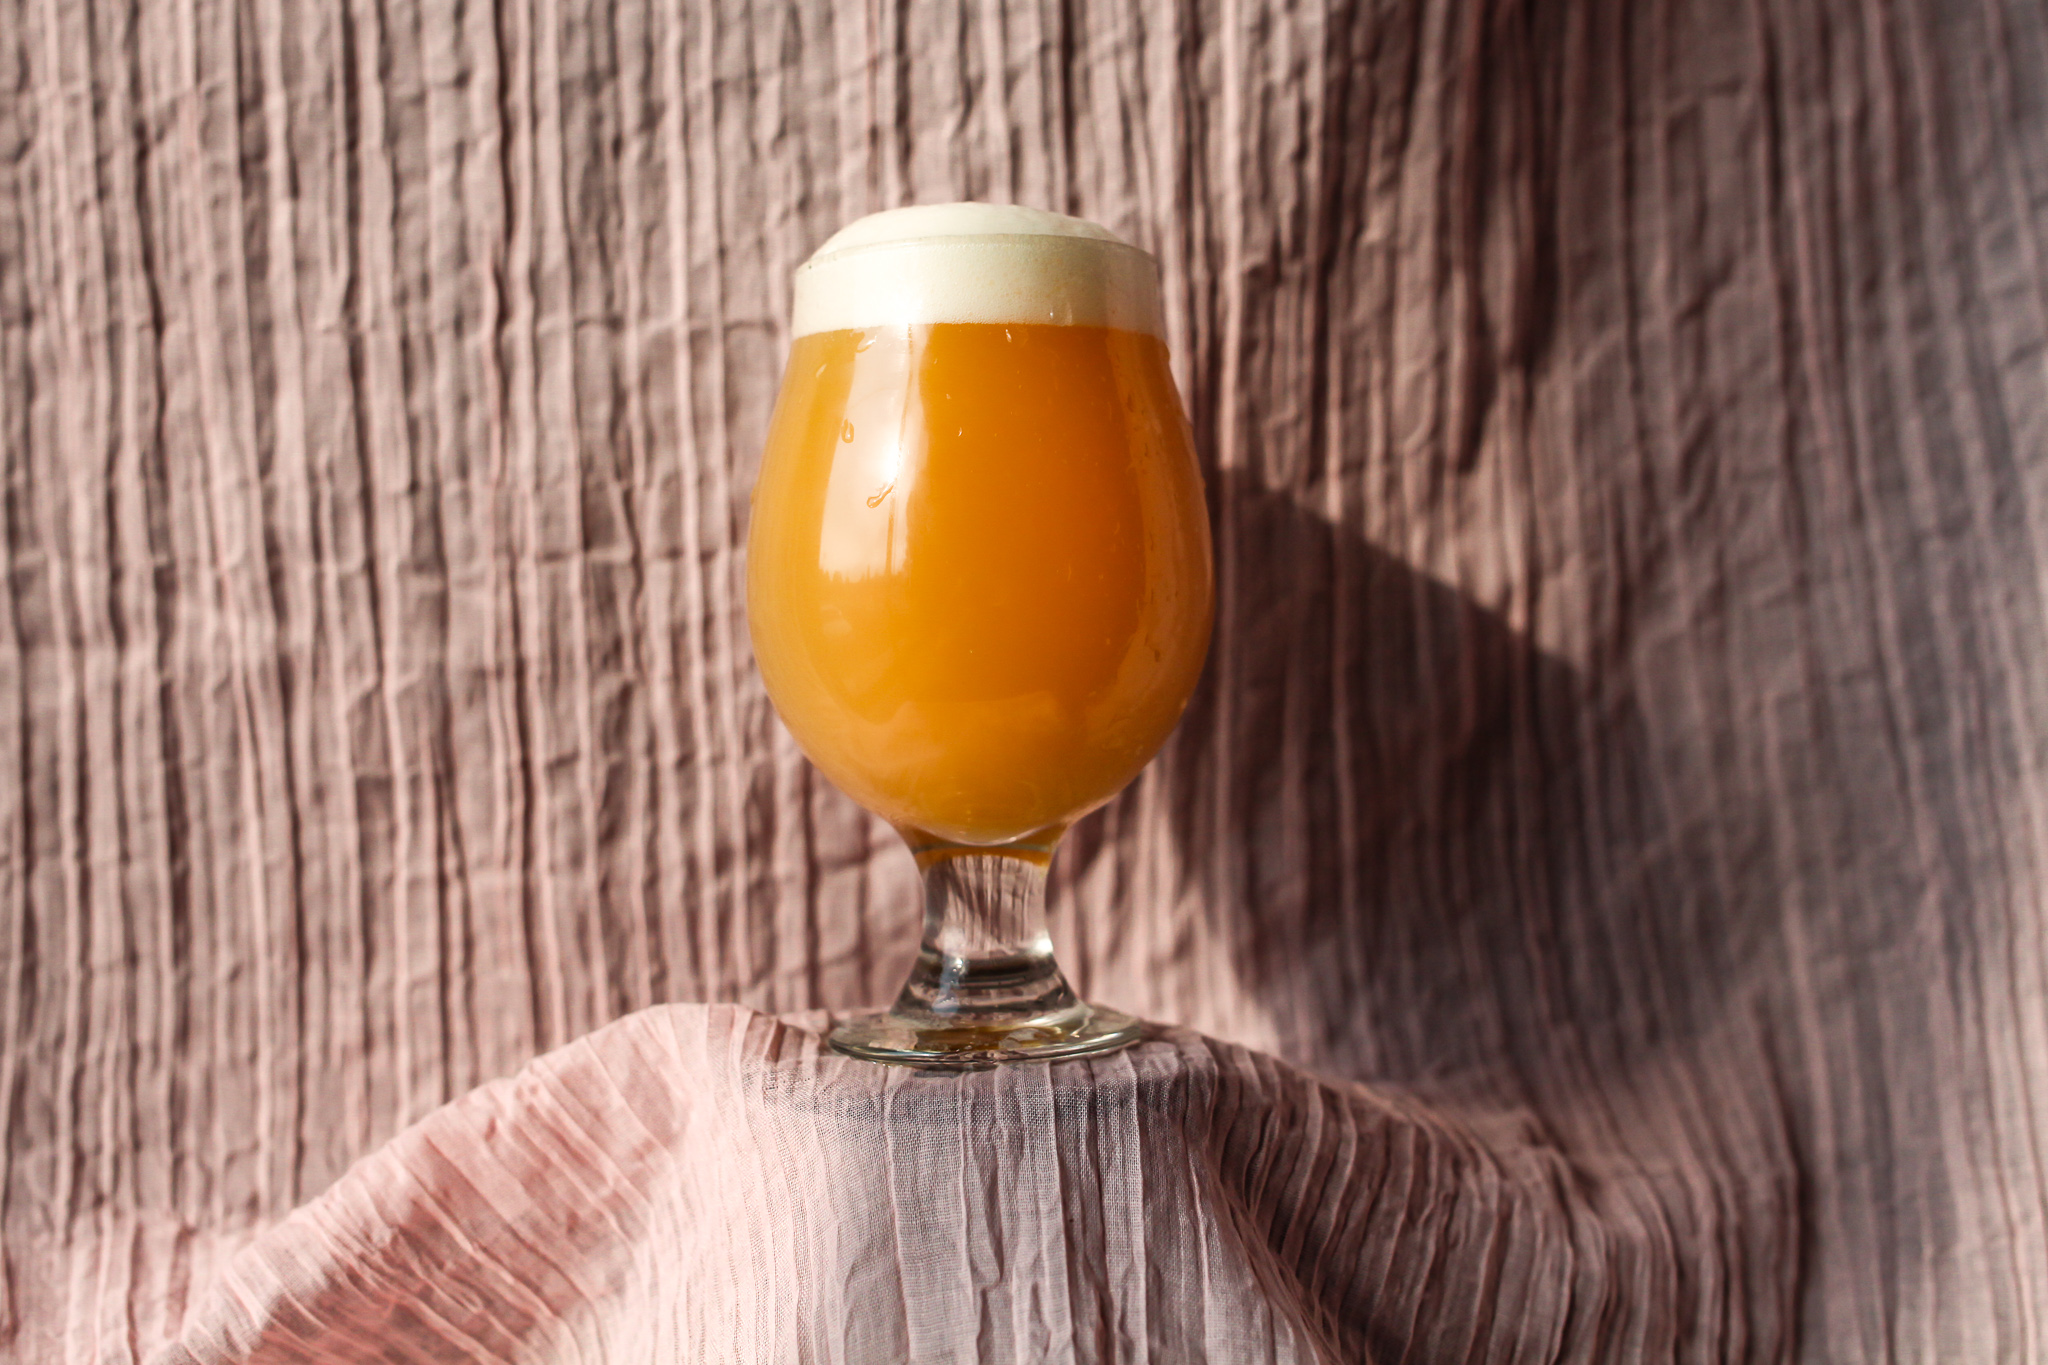 A bright orange hazy IPA in a tulip glass against a wrinkled pink lined cloth backdrop. The creases in the cloth create dramatic shadows trending  from left to right.